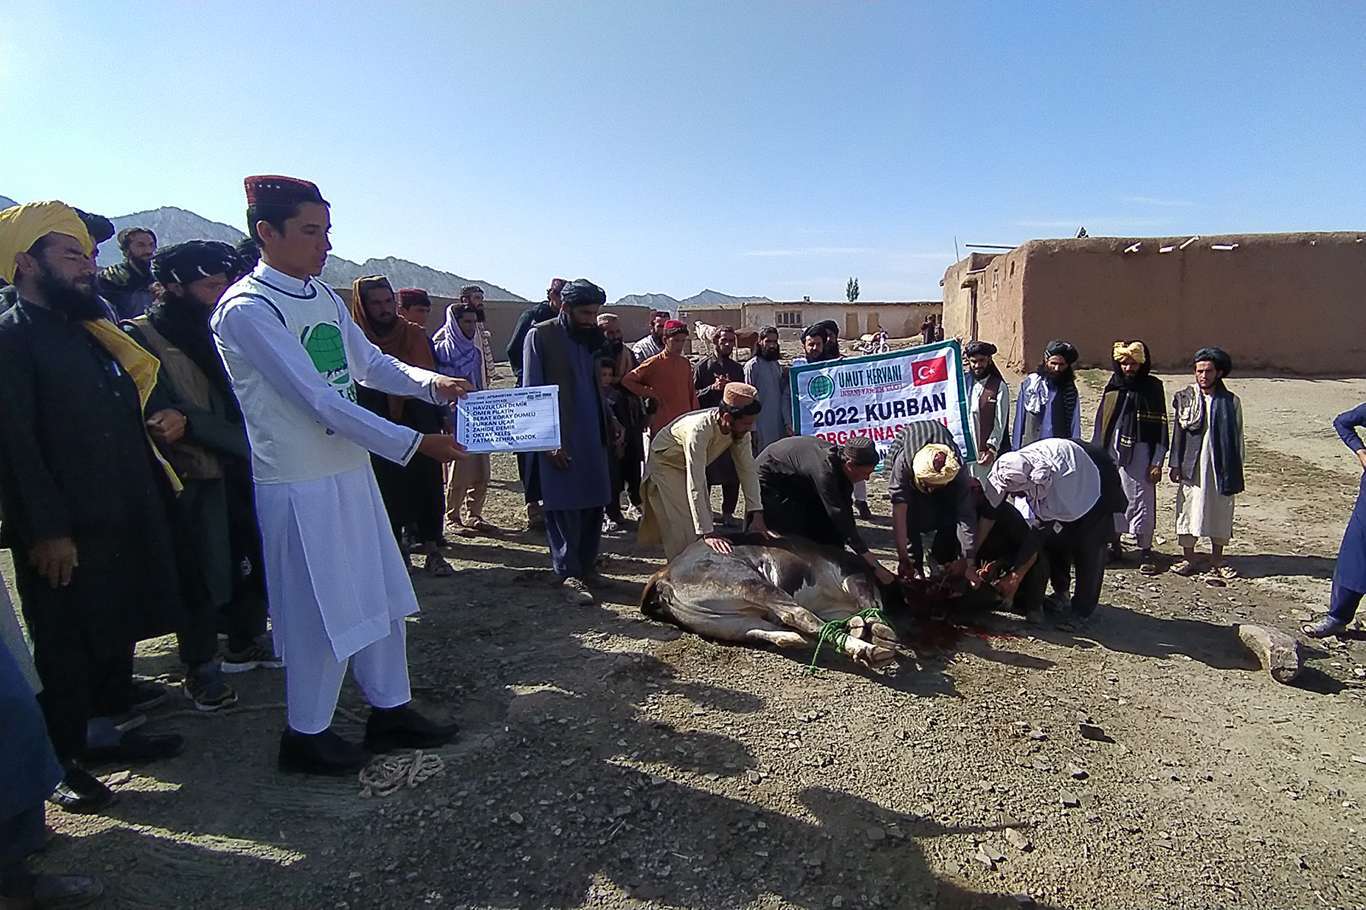 Charitable foundations distribute sacrificial meat to 45,000 families in Afghanistan